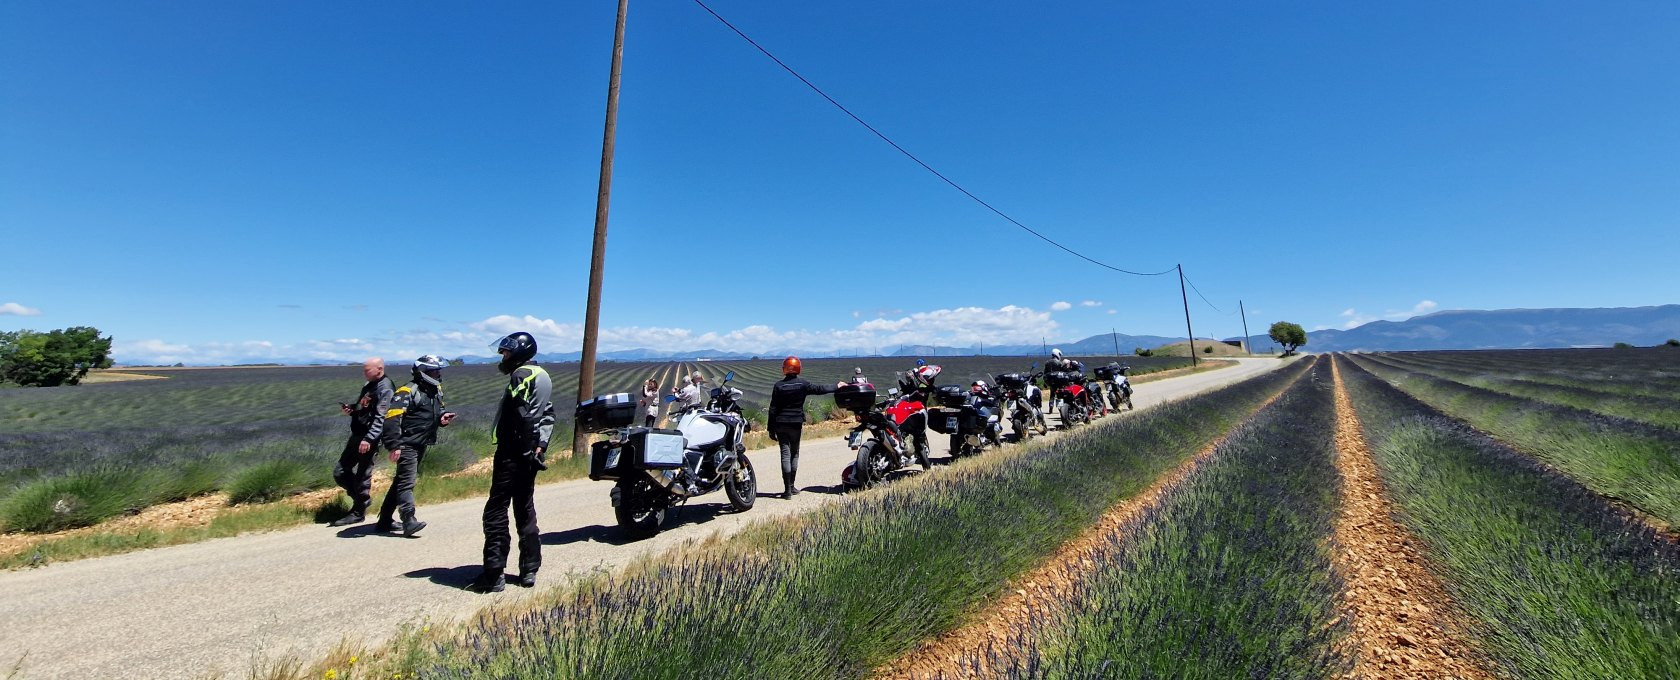 Motorcycling in the South of France